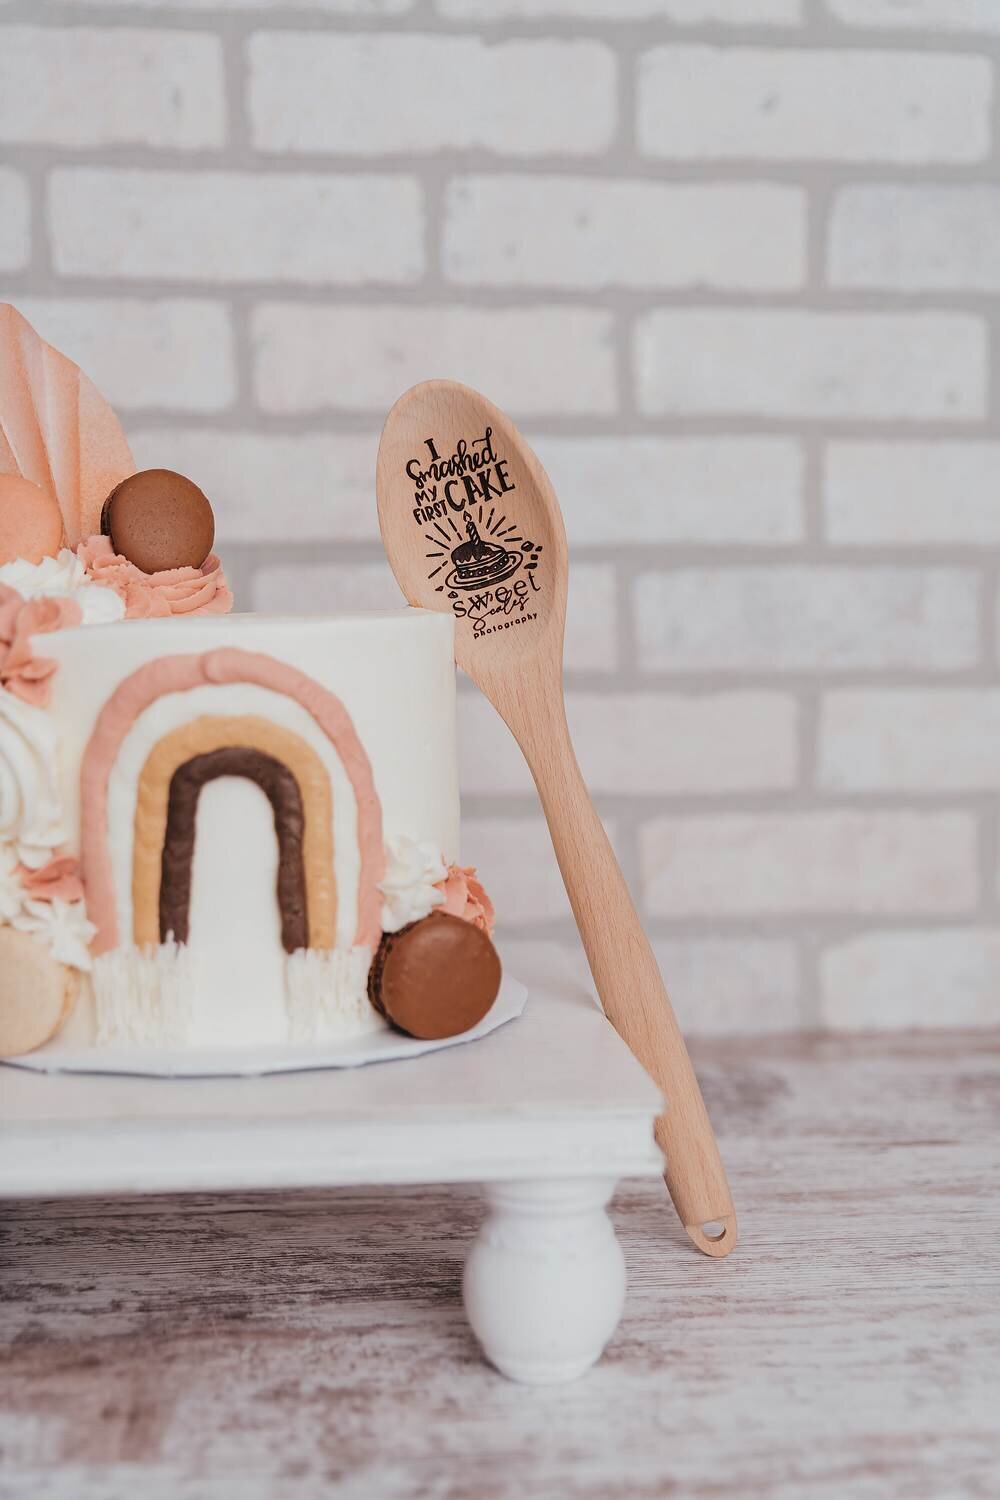 cake with a wooden spoon